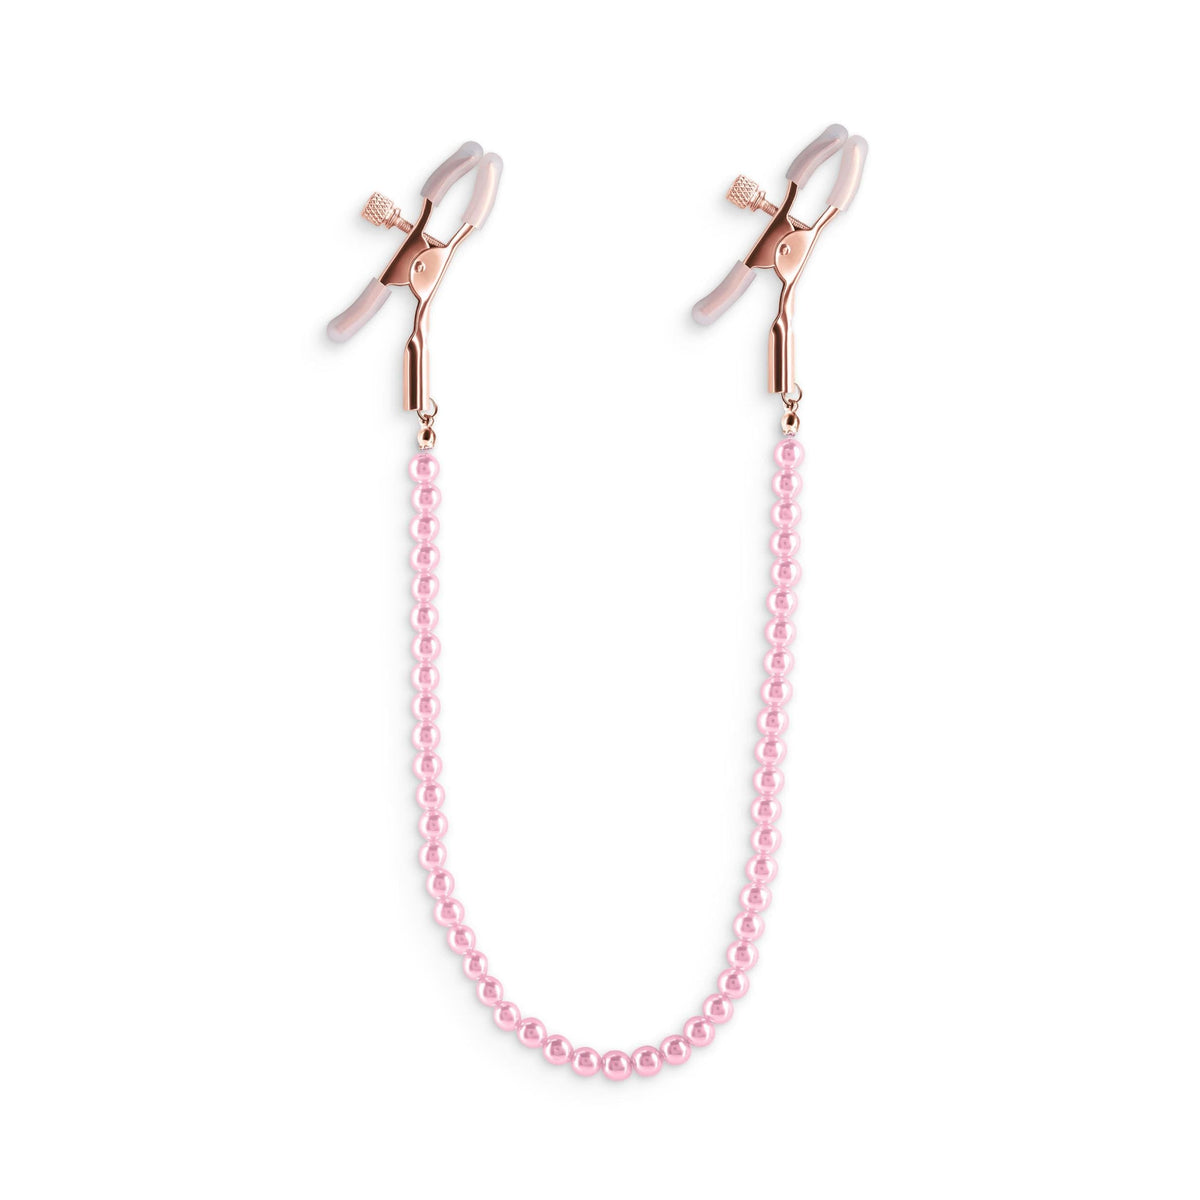 bound nipple clamps dc1 pink